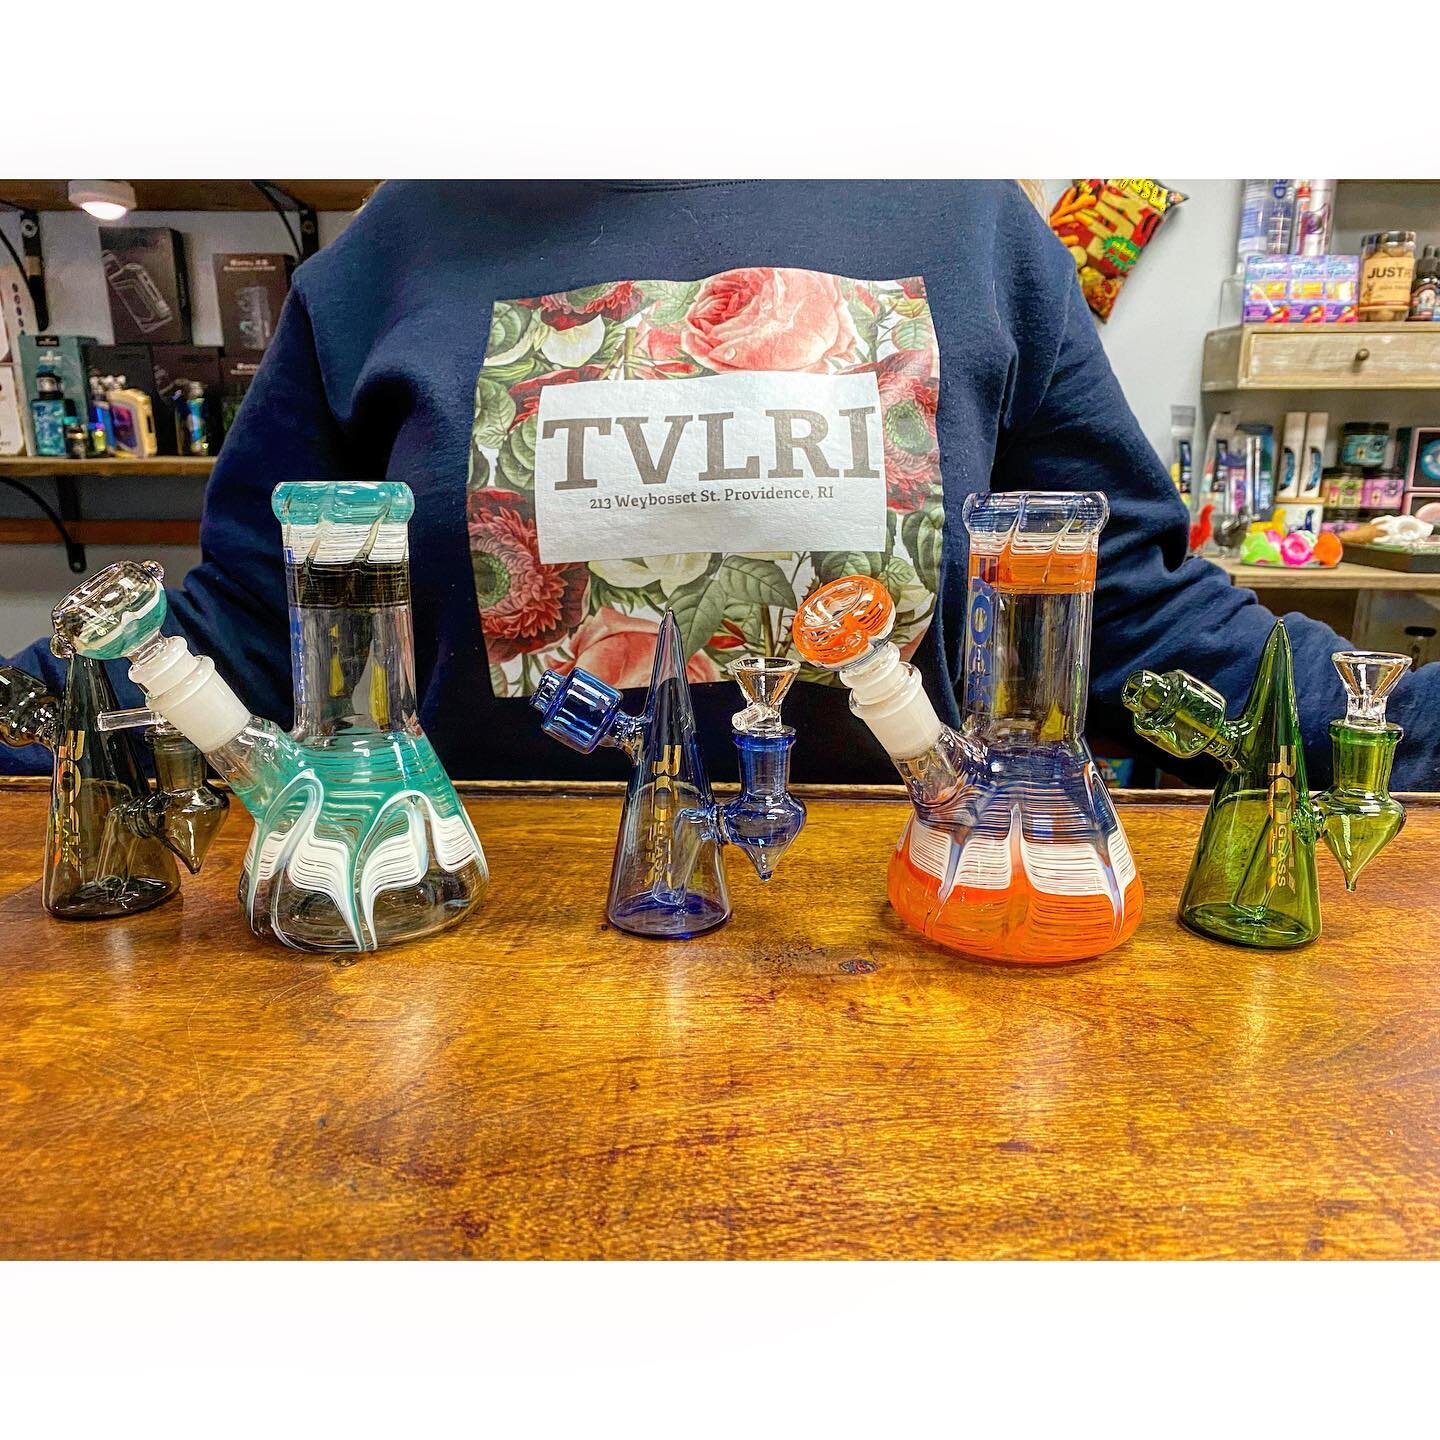 New glass has arrived at TVLRI! 😍Affordable, portable, and ready to pair with any of our CBD products. *TVLRI OFFERS SHIPMENT 🚚 &amp; CURBSIDE ON ALL PRODUCTS* &mdash;&mdash;&mdash;&mdash;&mdash;&mdash;&mdash;&mdash;&mdash;&mdash;&mdash;&mdash;&mda